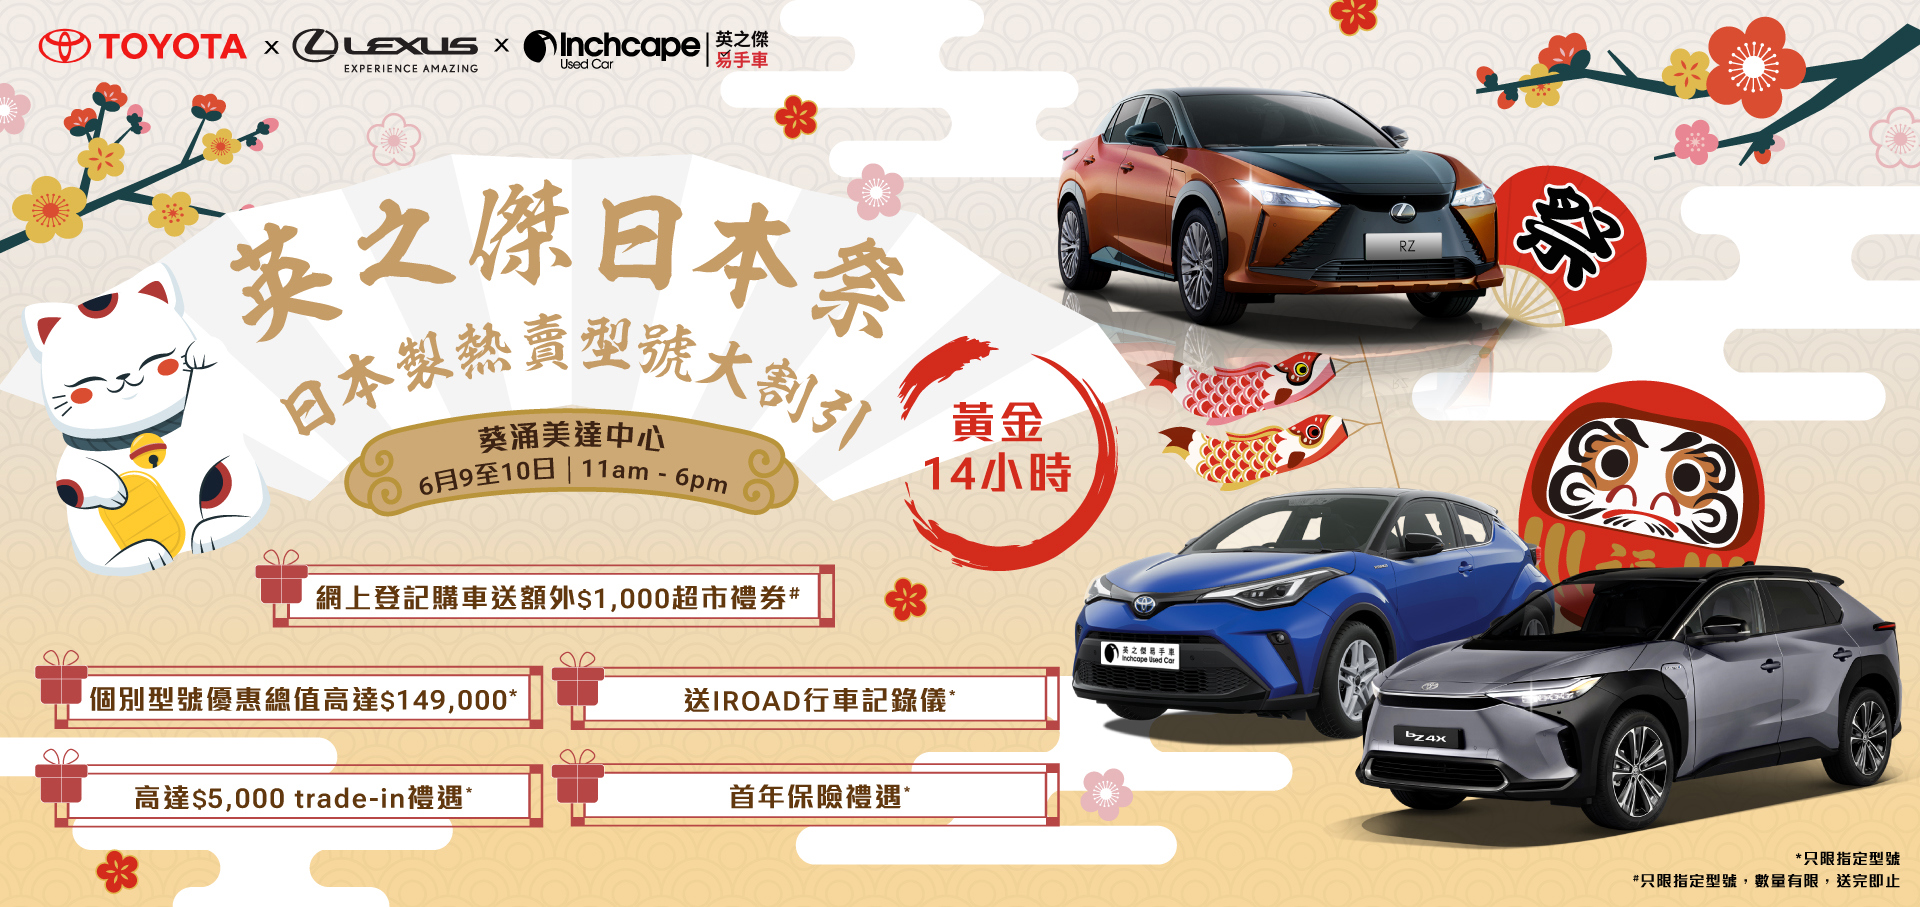 9 - 10/6 INCHCAPE JAPANFEST | 5 Exclusive Rewards for Top-Selling Models from Japan